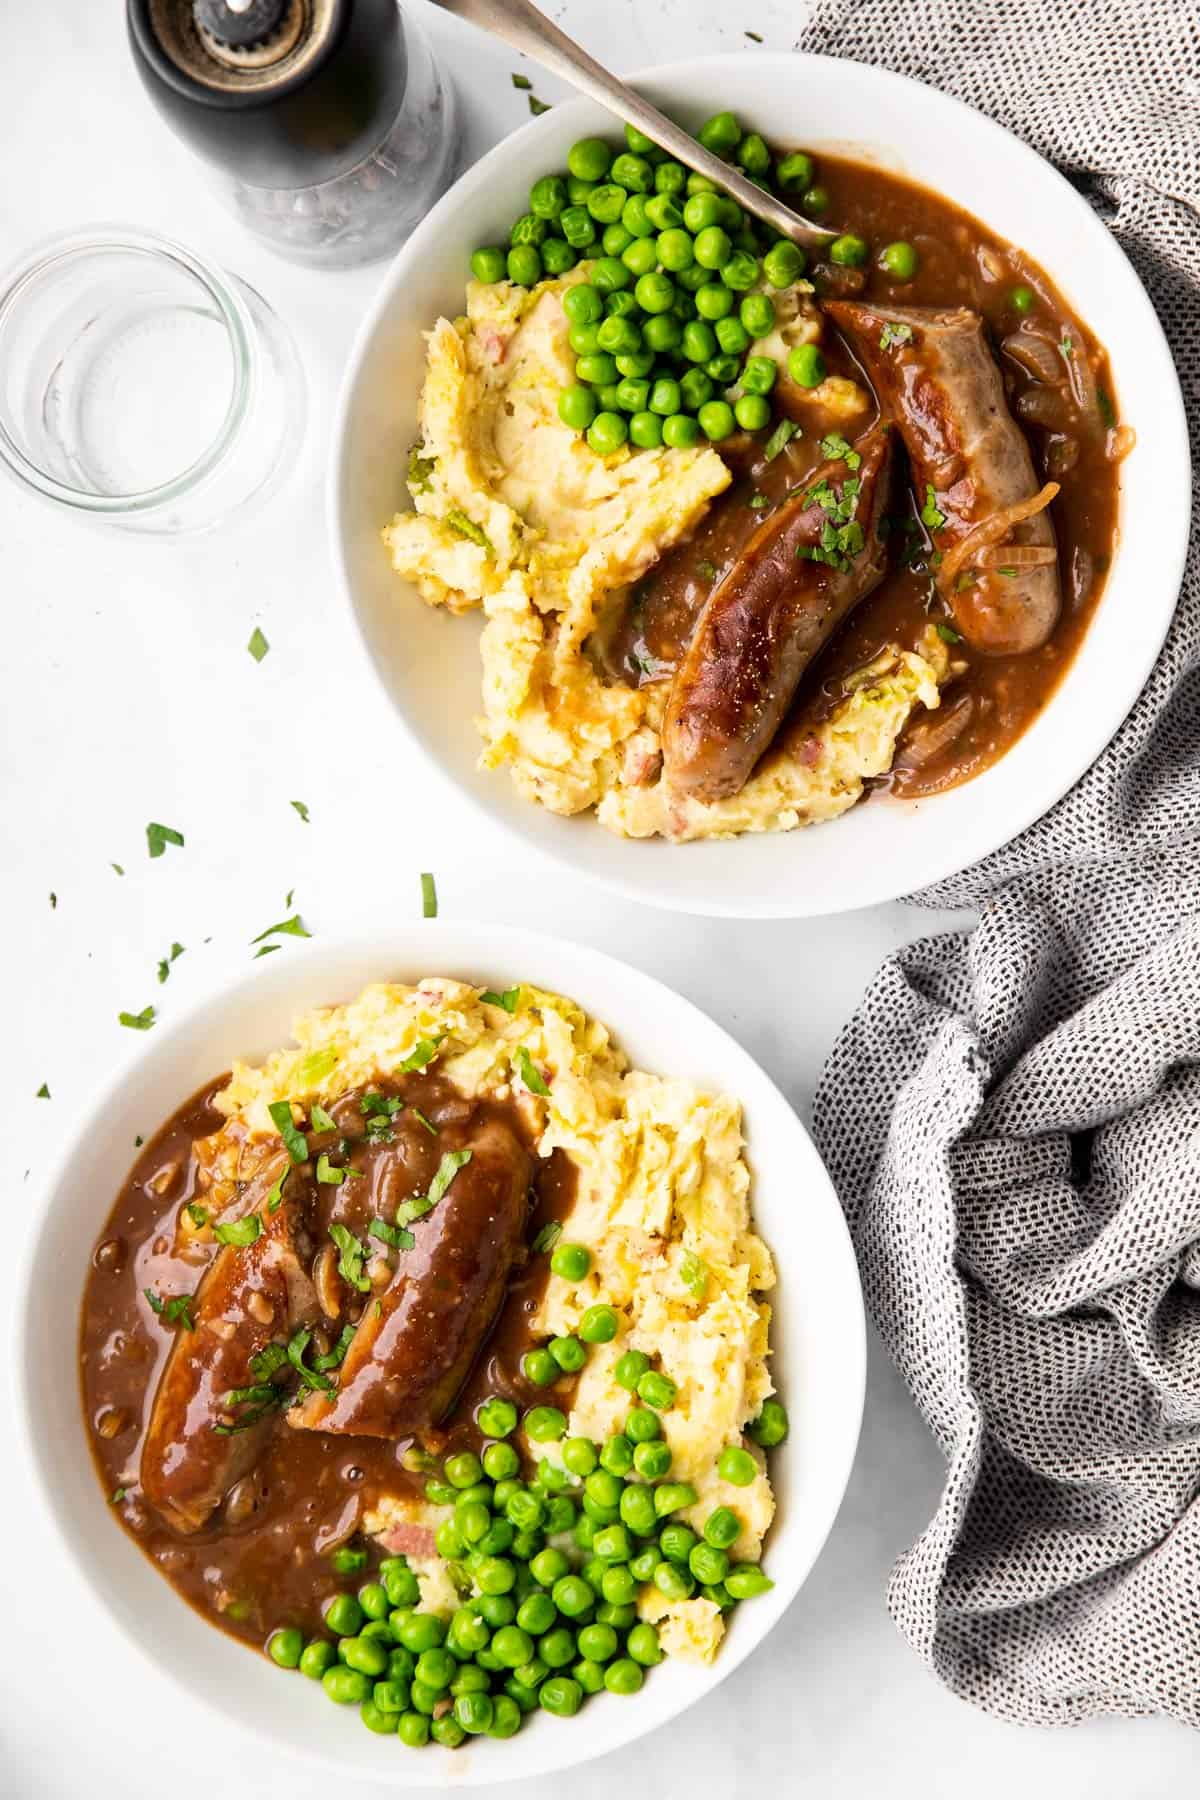 tow plates on a light surface with mashed potatoes, gravy, peas and sausages